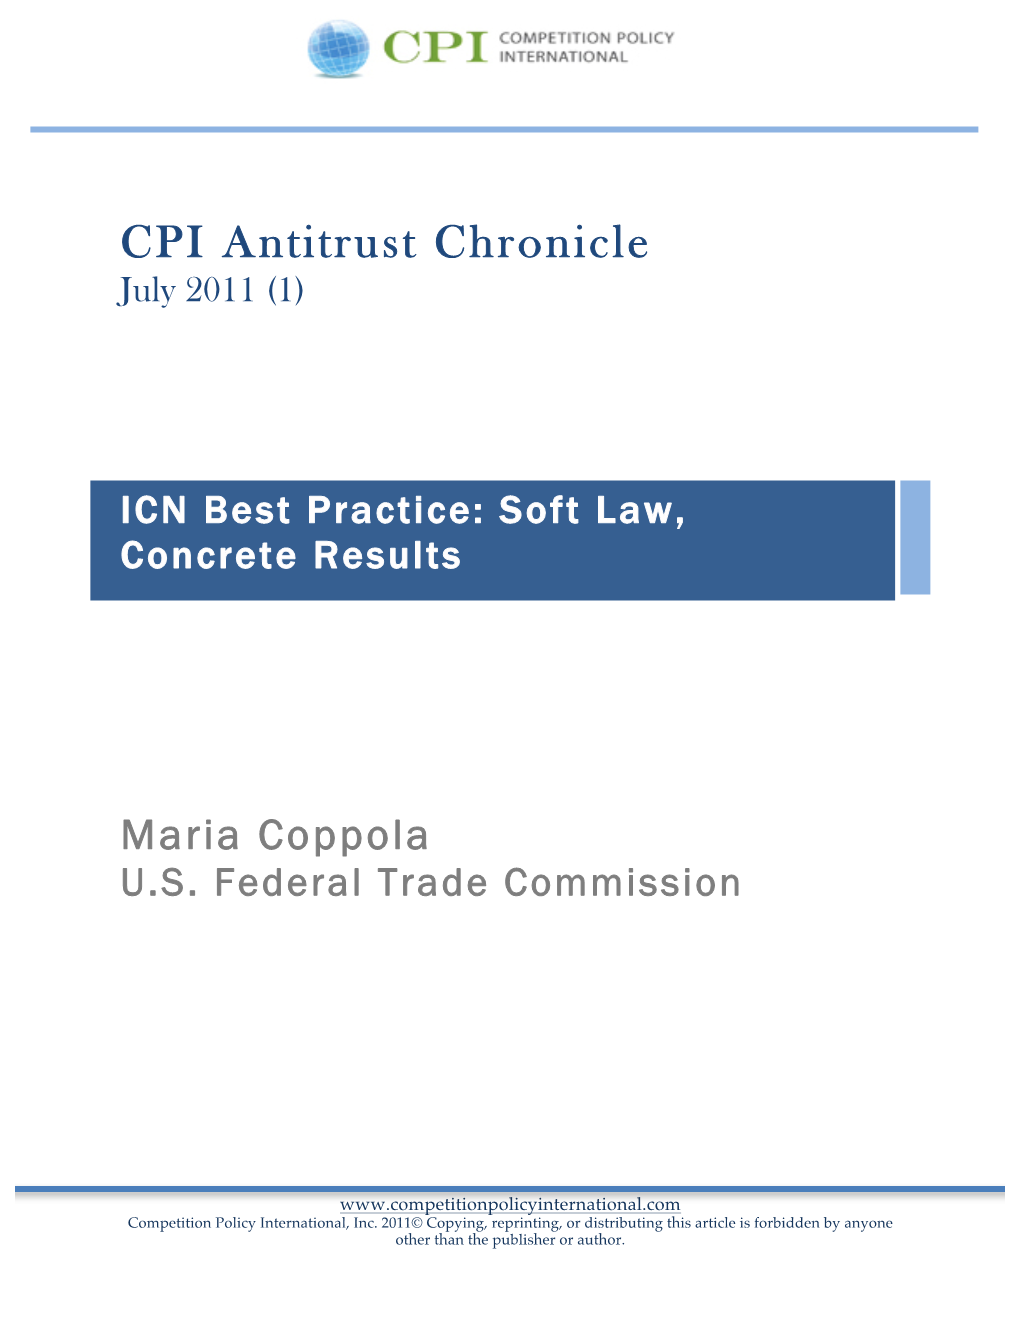 ICN Best Practice: Soft Law, Concrete Results